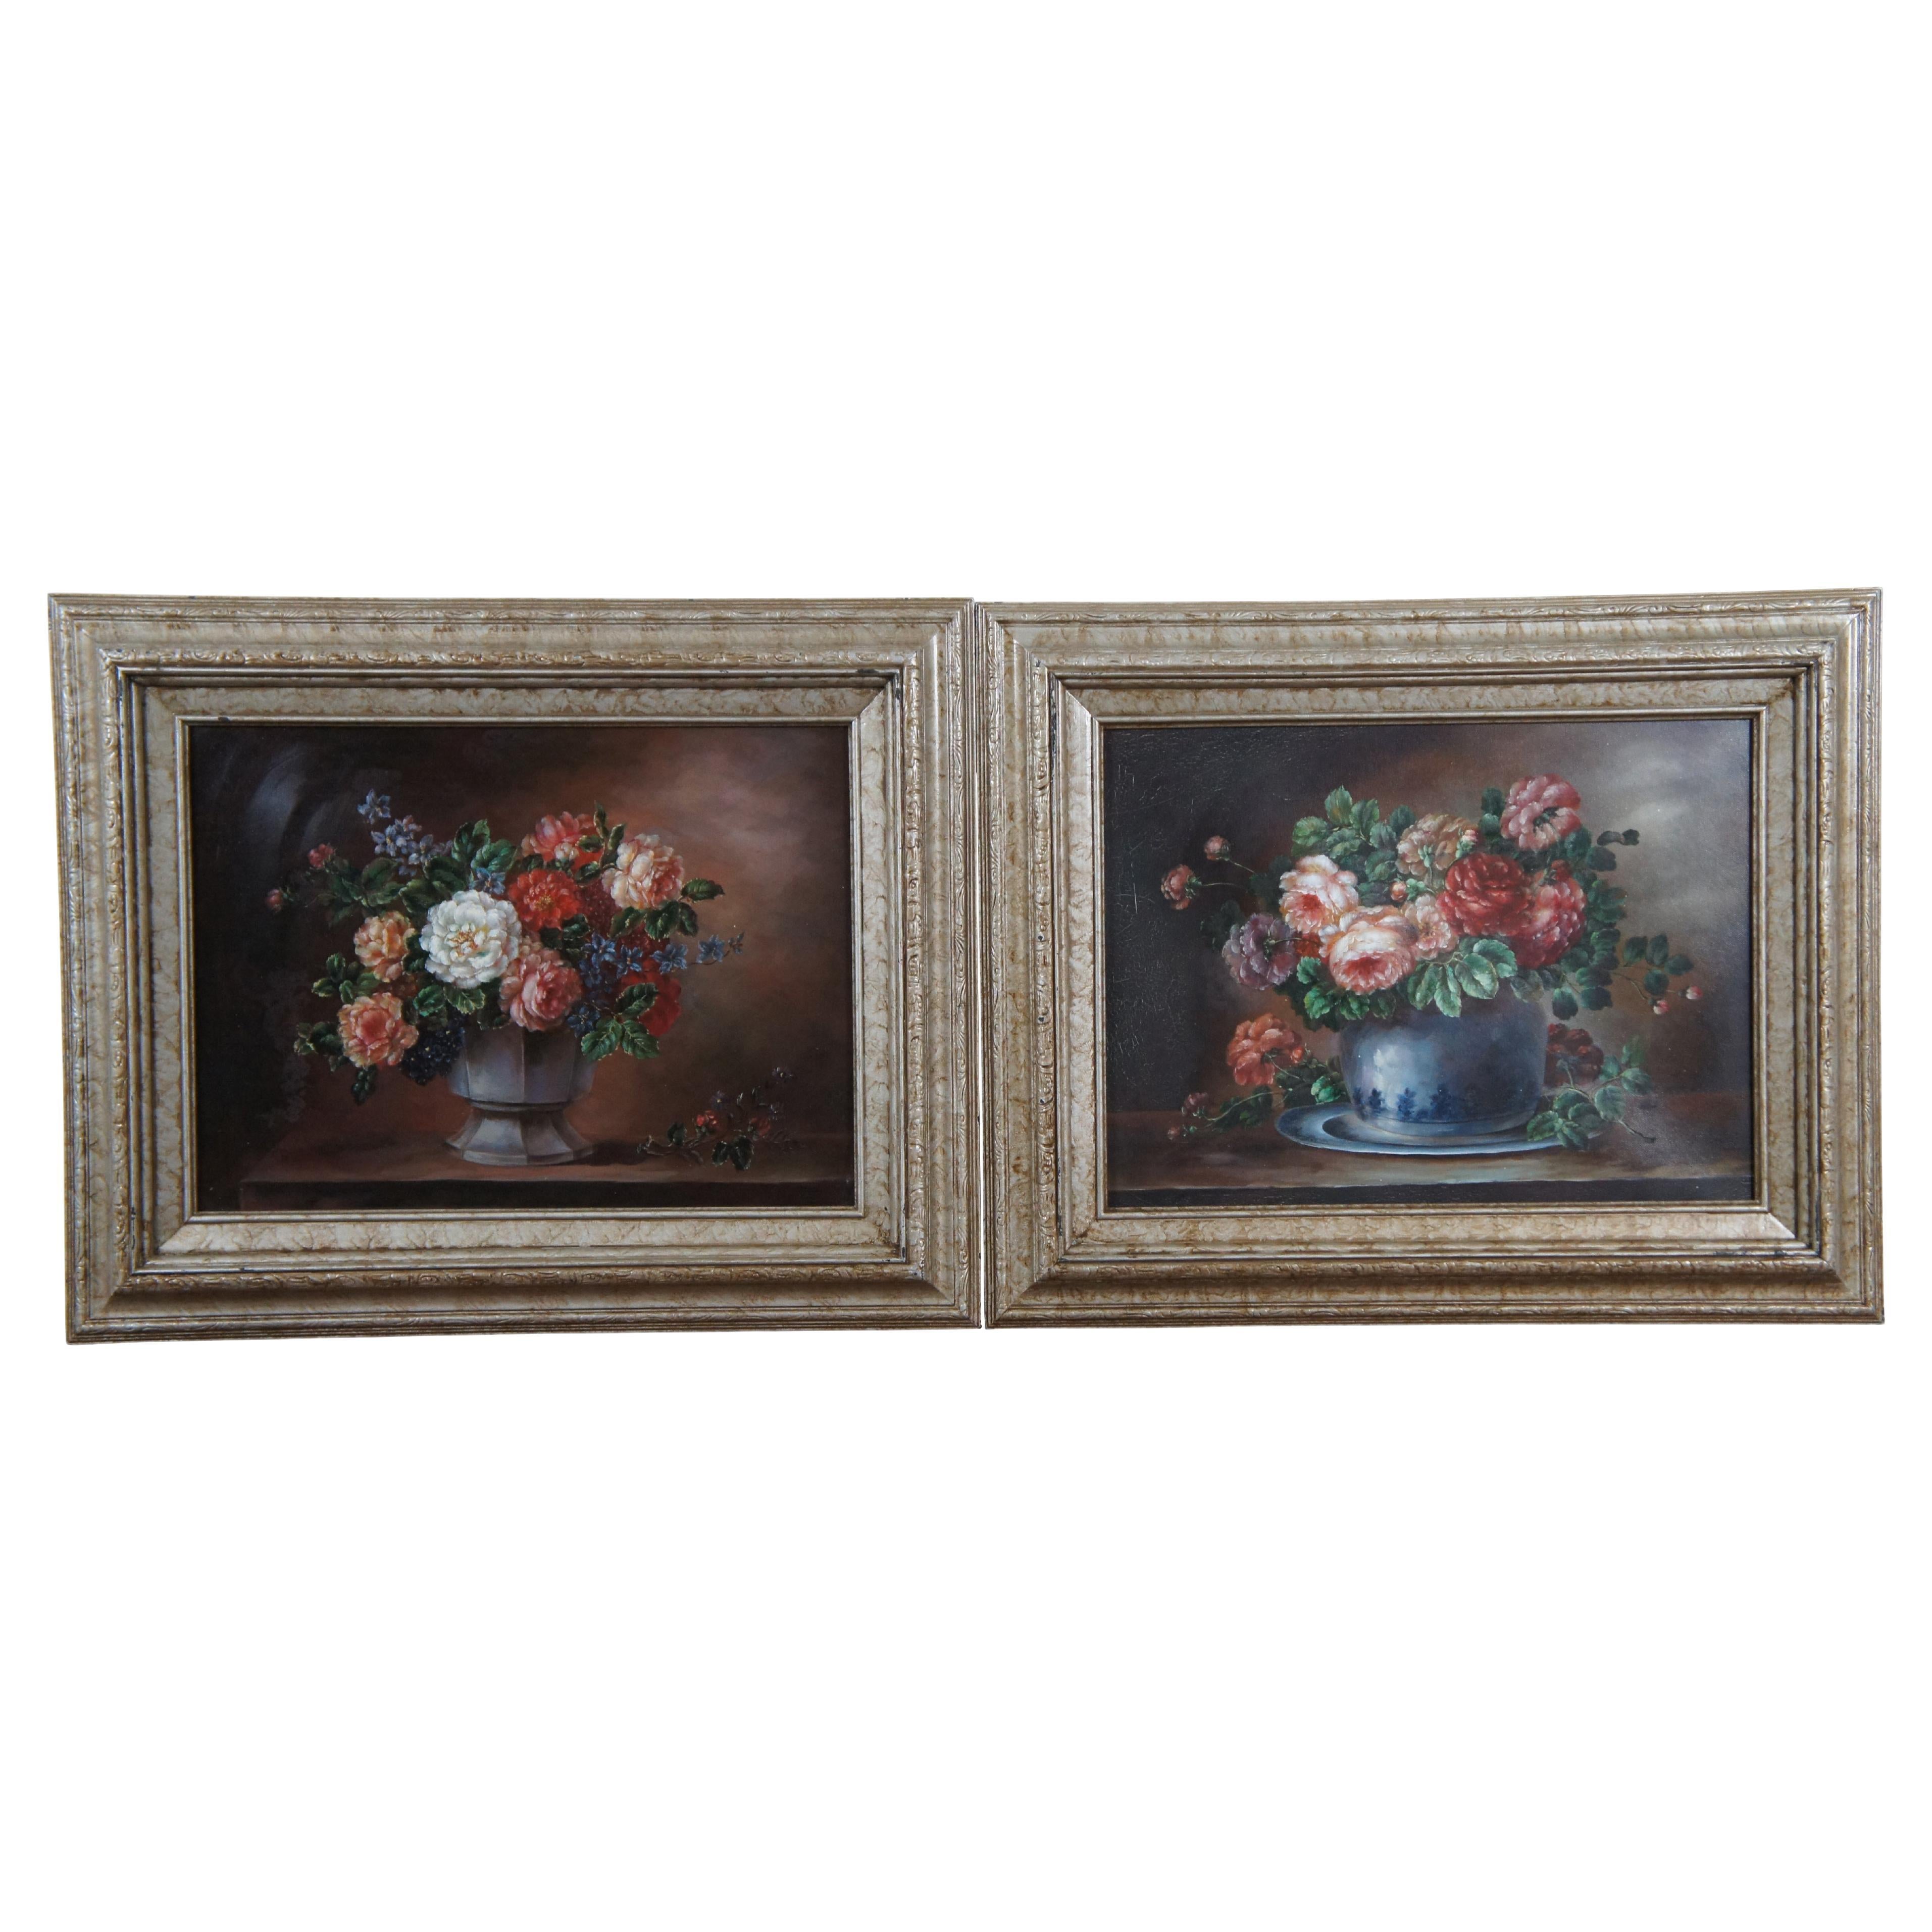 2 Oil on Canvas Floral Still Life Paintings Bouquet Flowers Realism Framed 22" For Sale